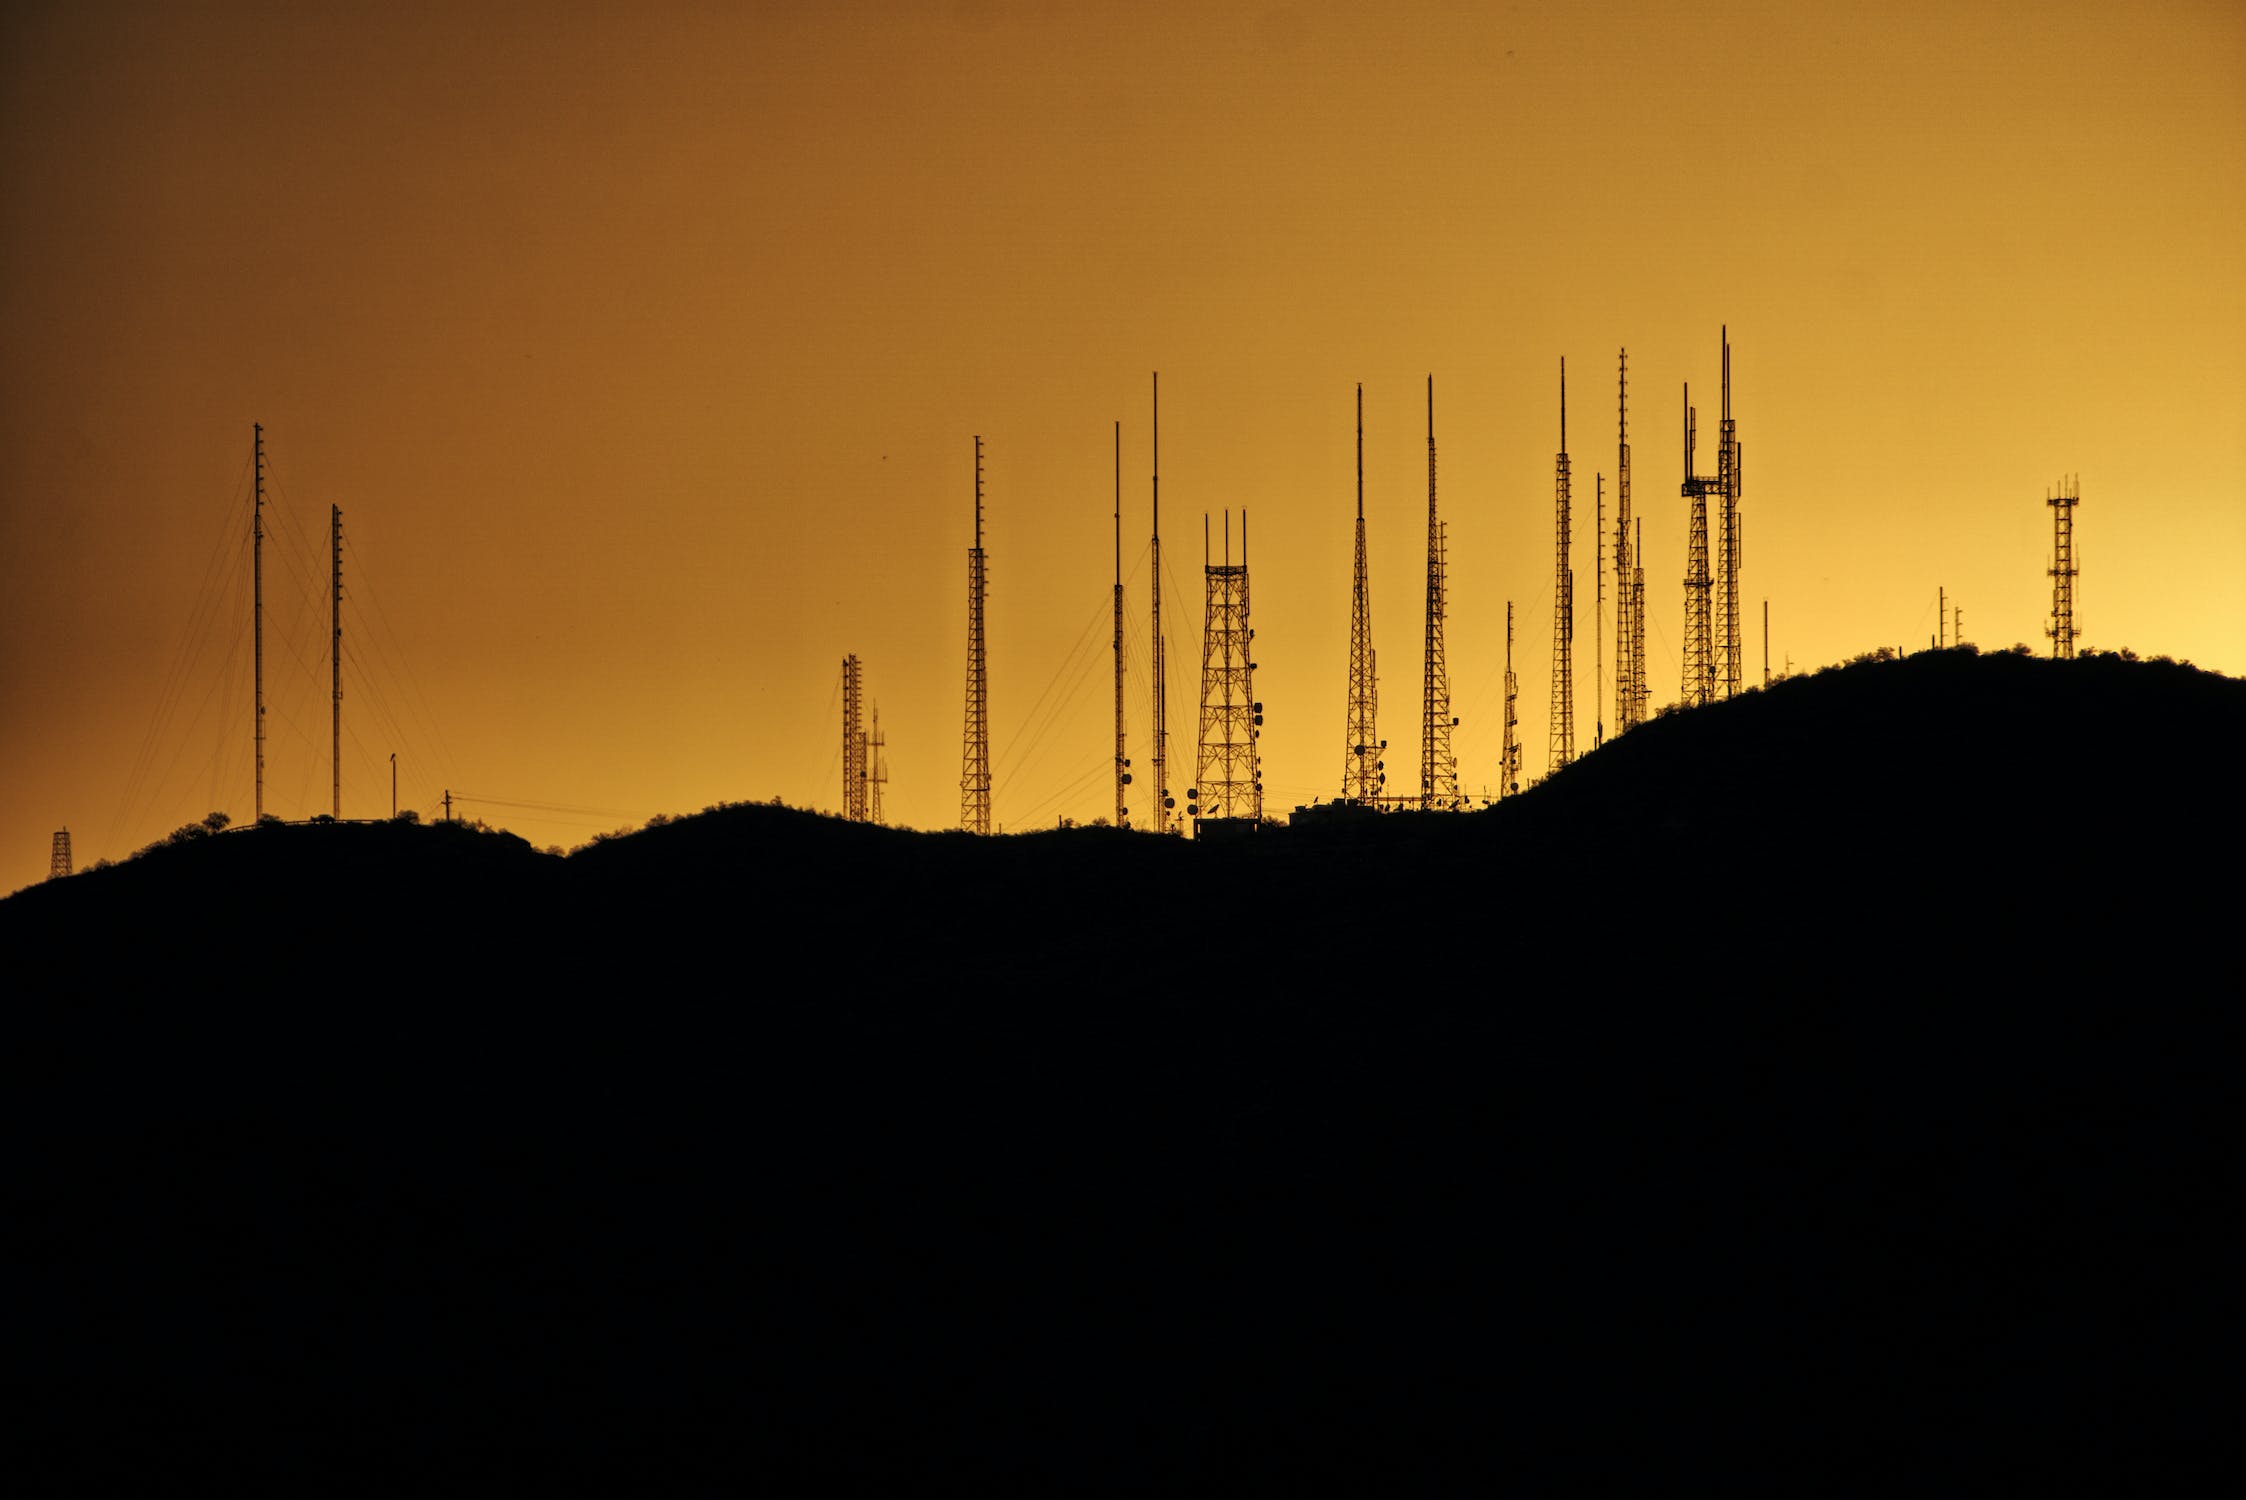 Telecom towers on hill